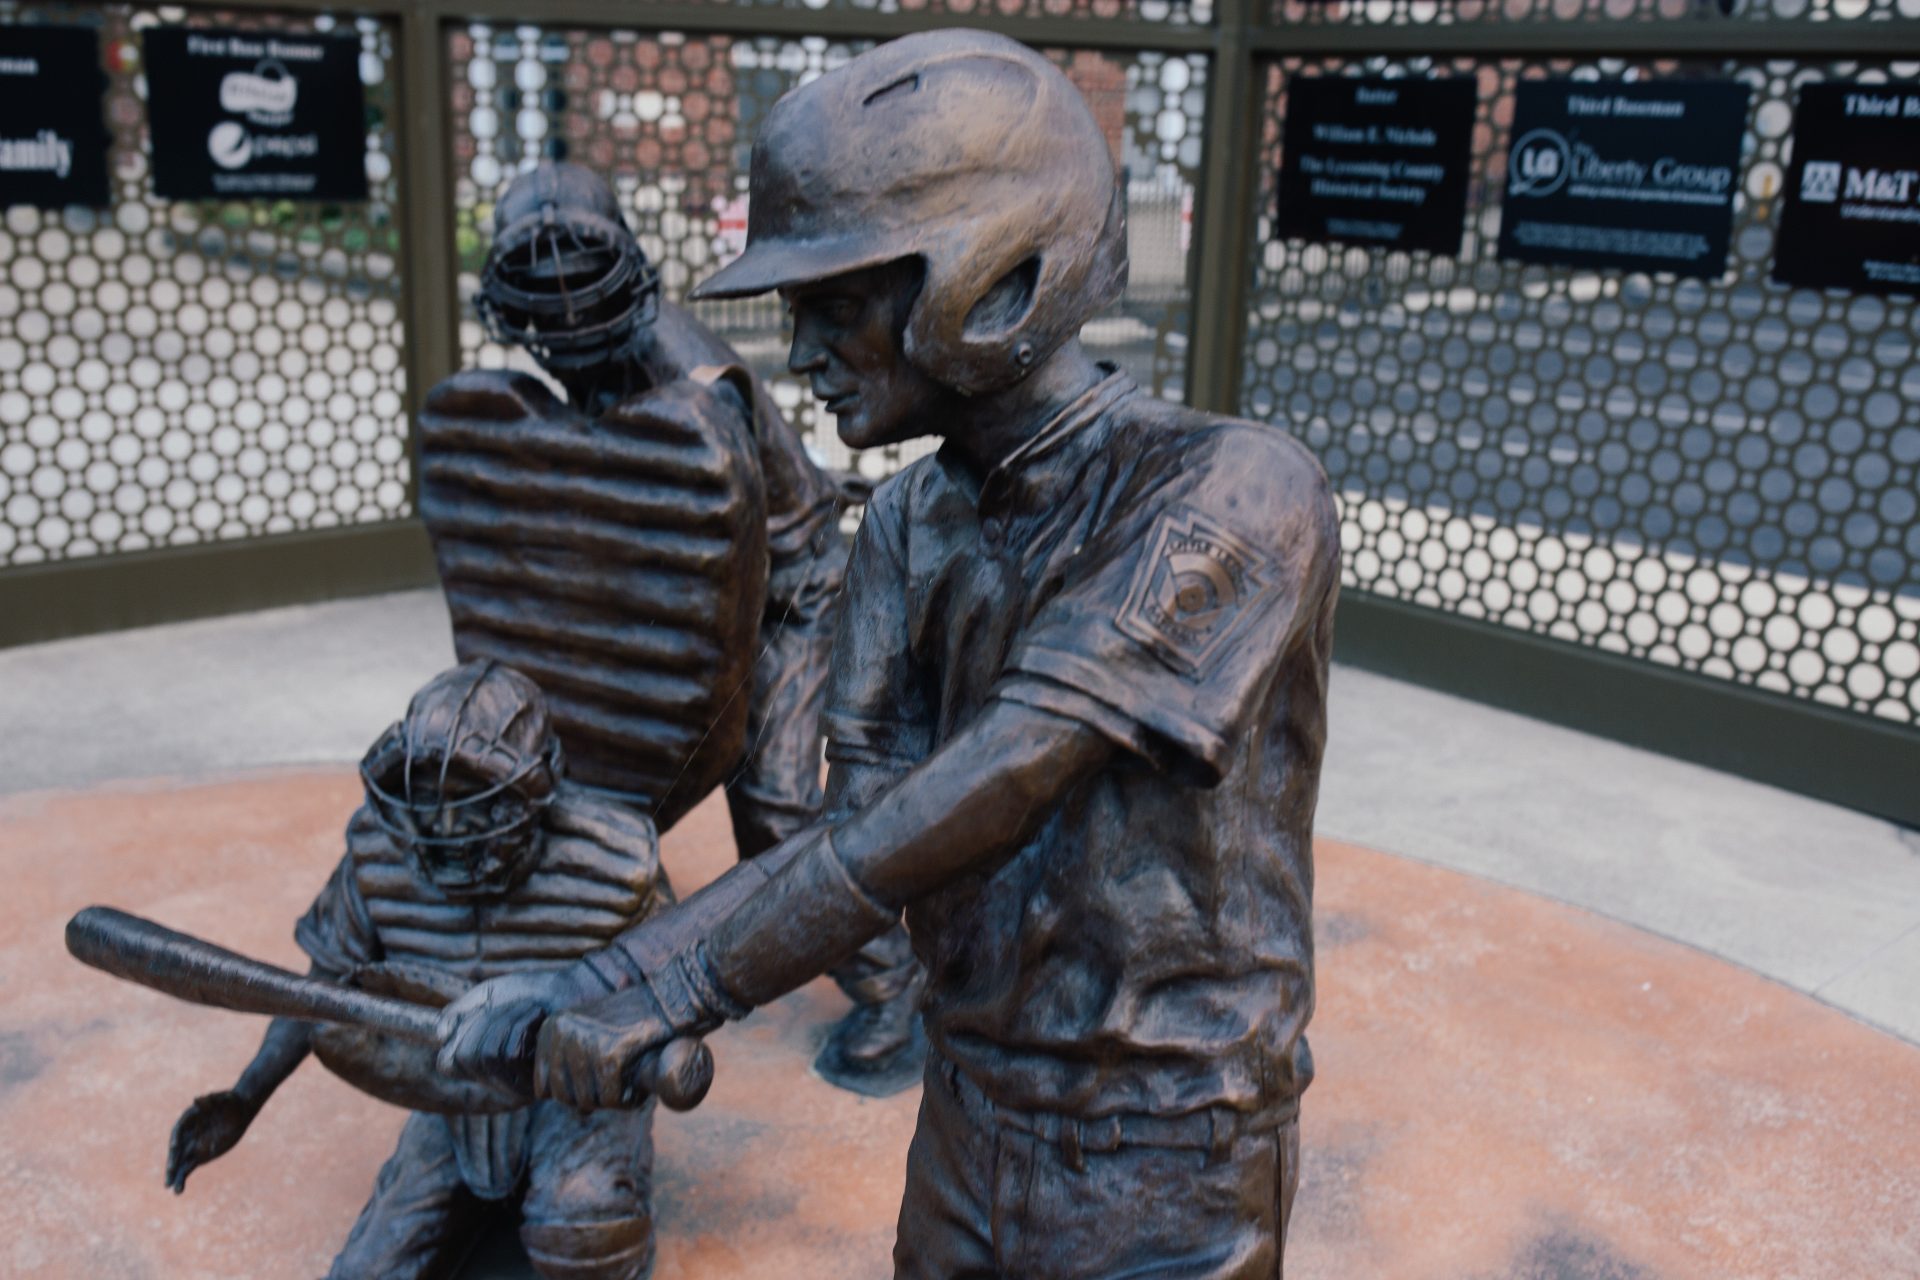 A Little League World Series statue in Williamsport, Pa., is seen on July 21, 2020. The 2020 tournament was canceled because of the coronavirus pandemic.